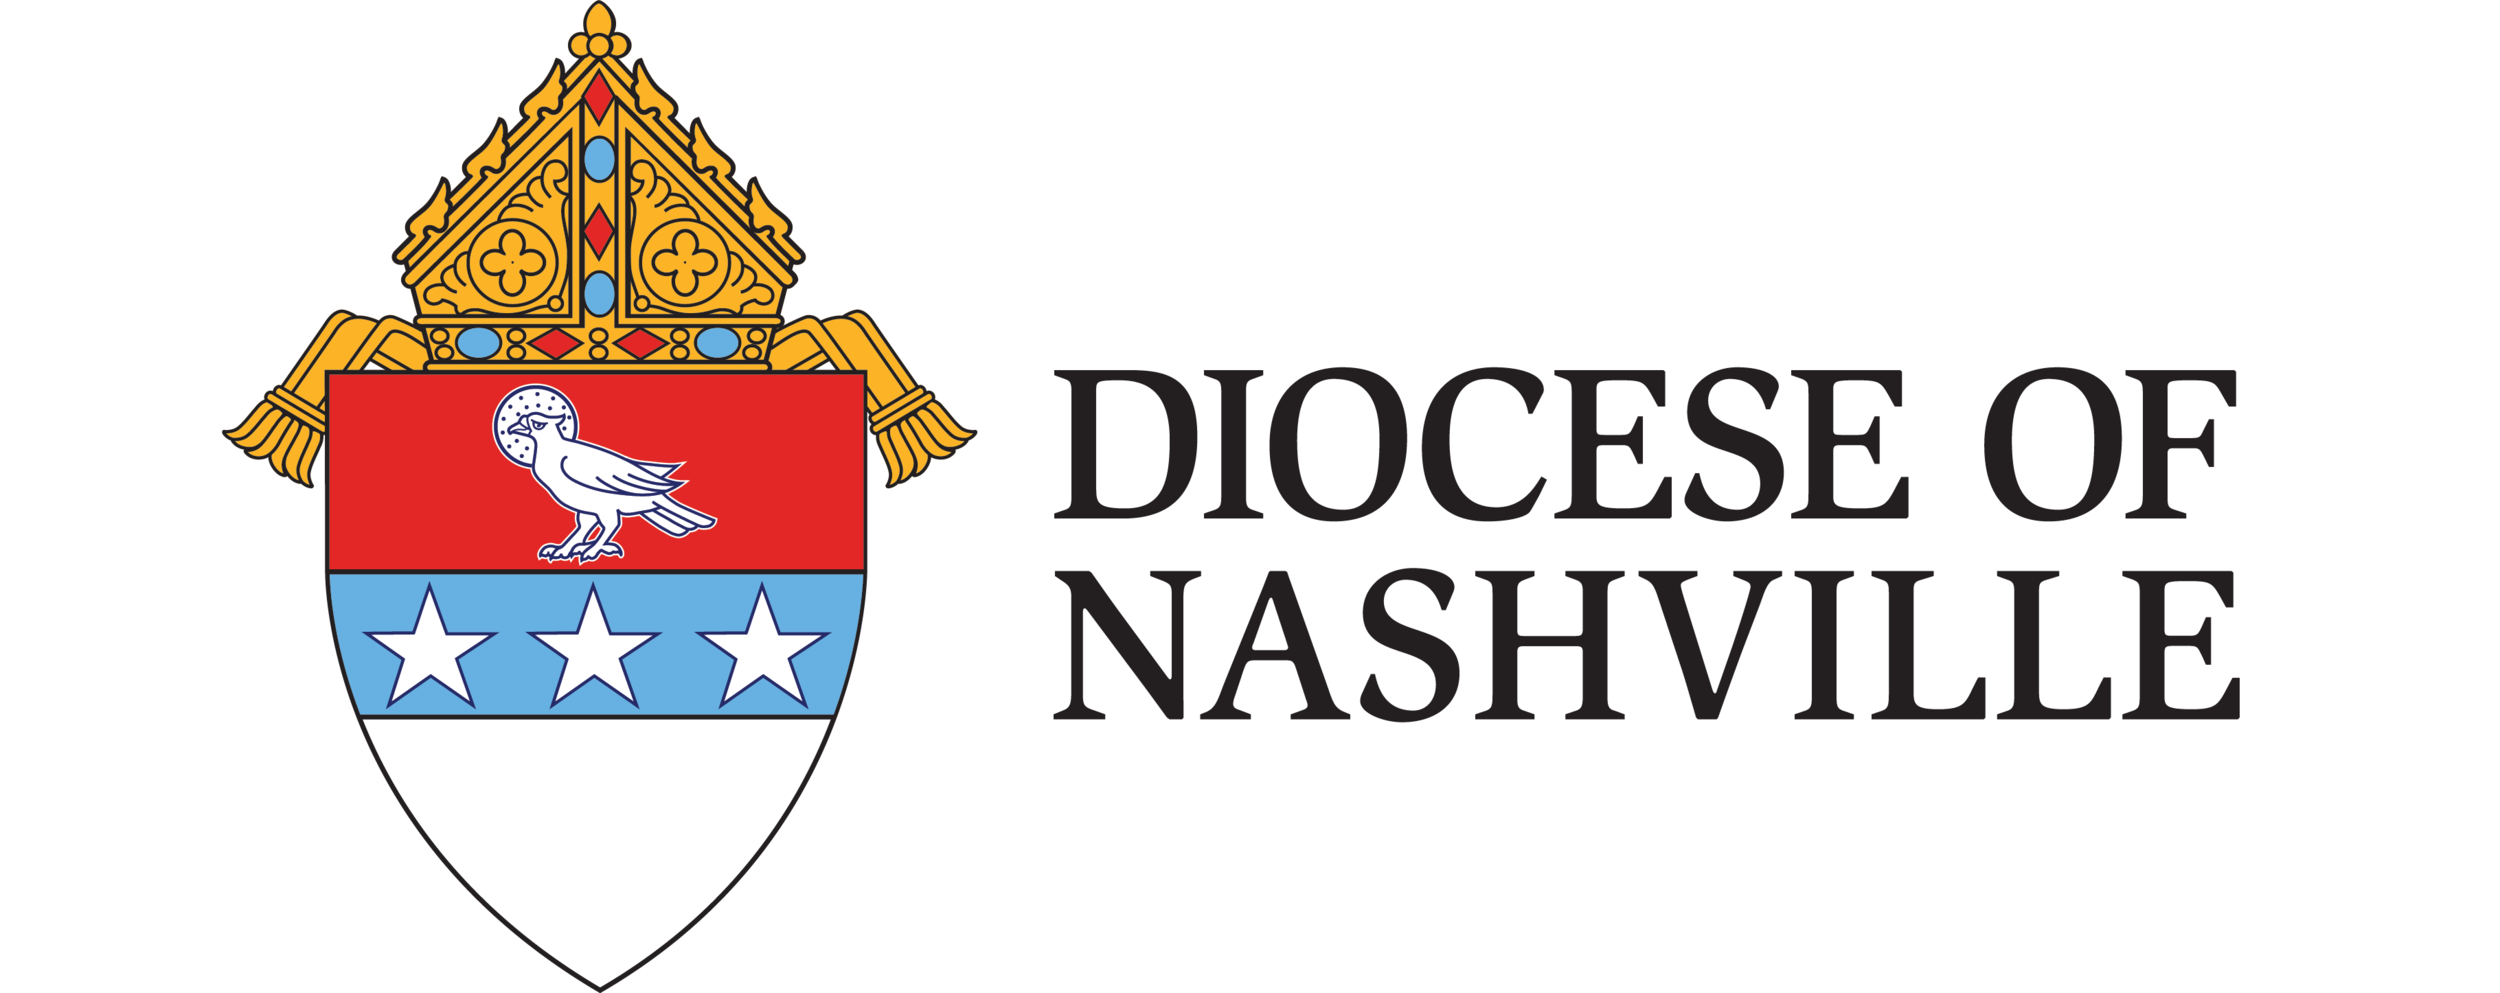 Seal_of_The_Diocese_NEW_10-22-2020.png